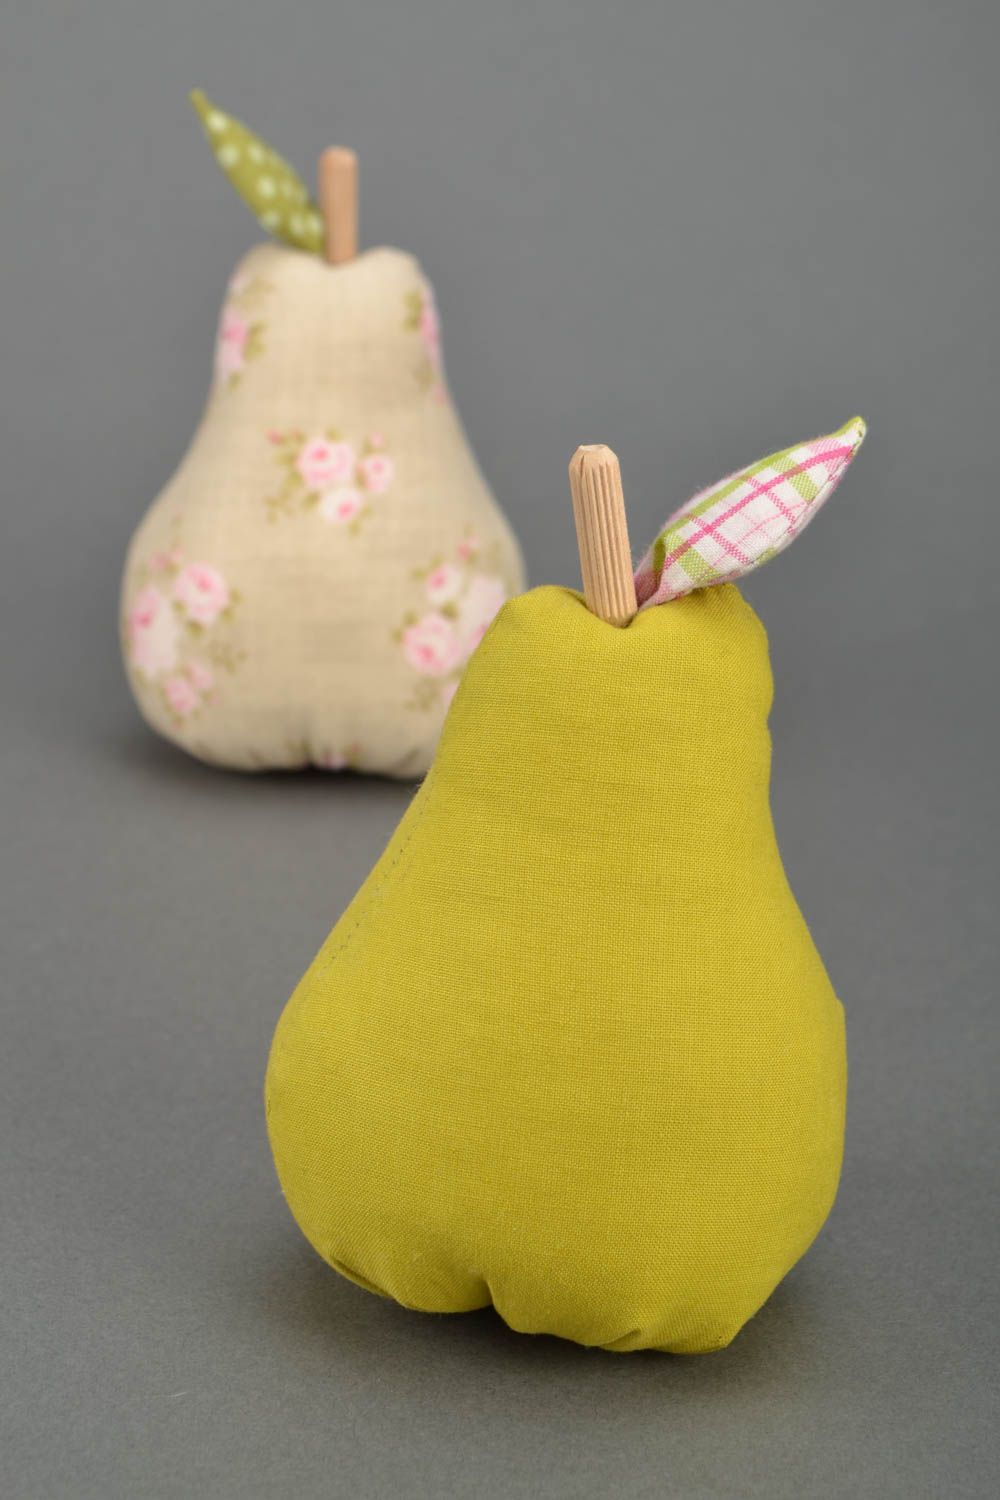 Homemade soft toy Pear photo 1